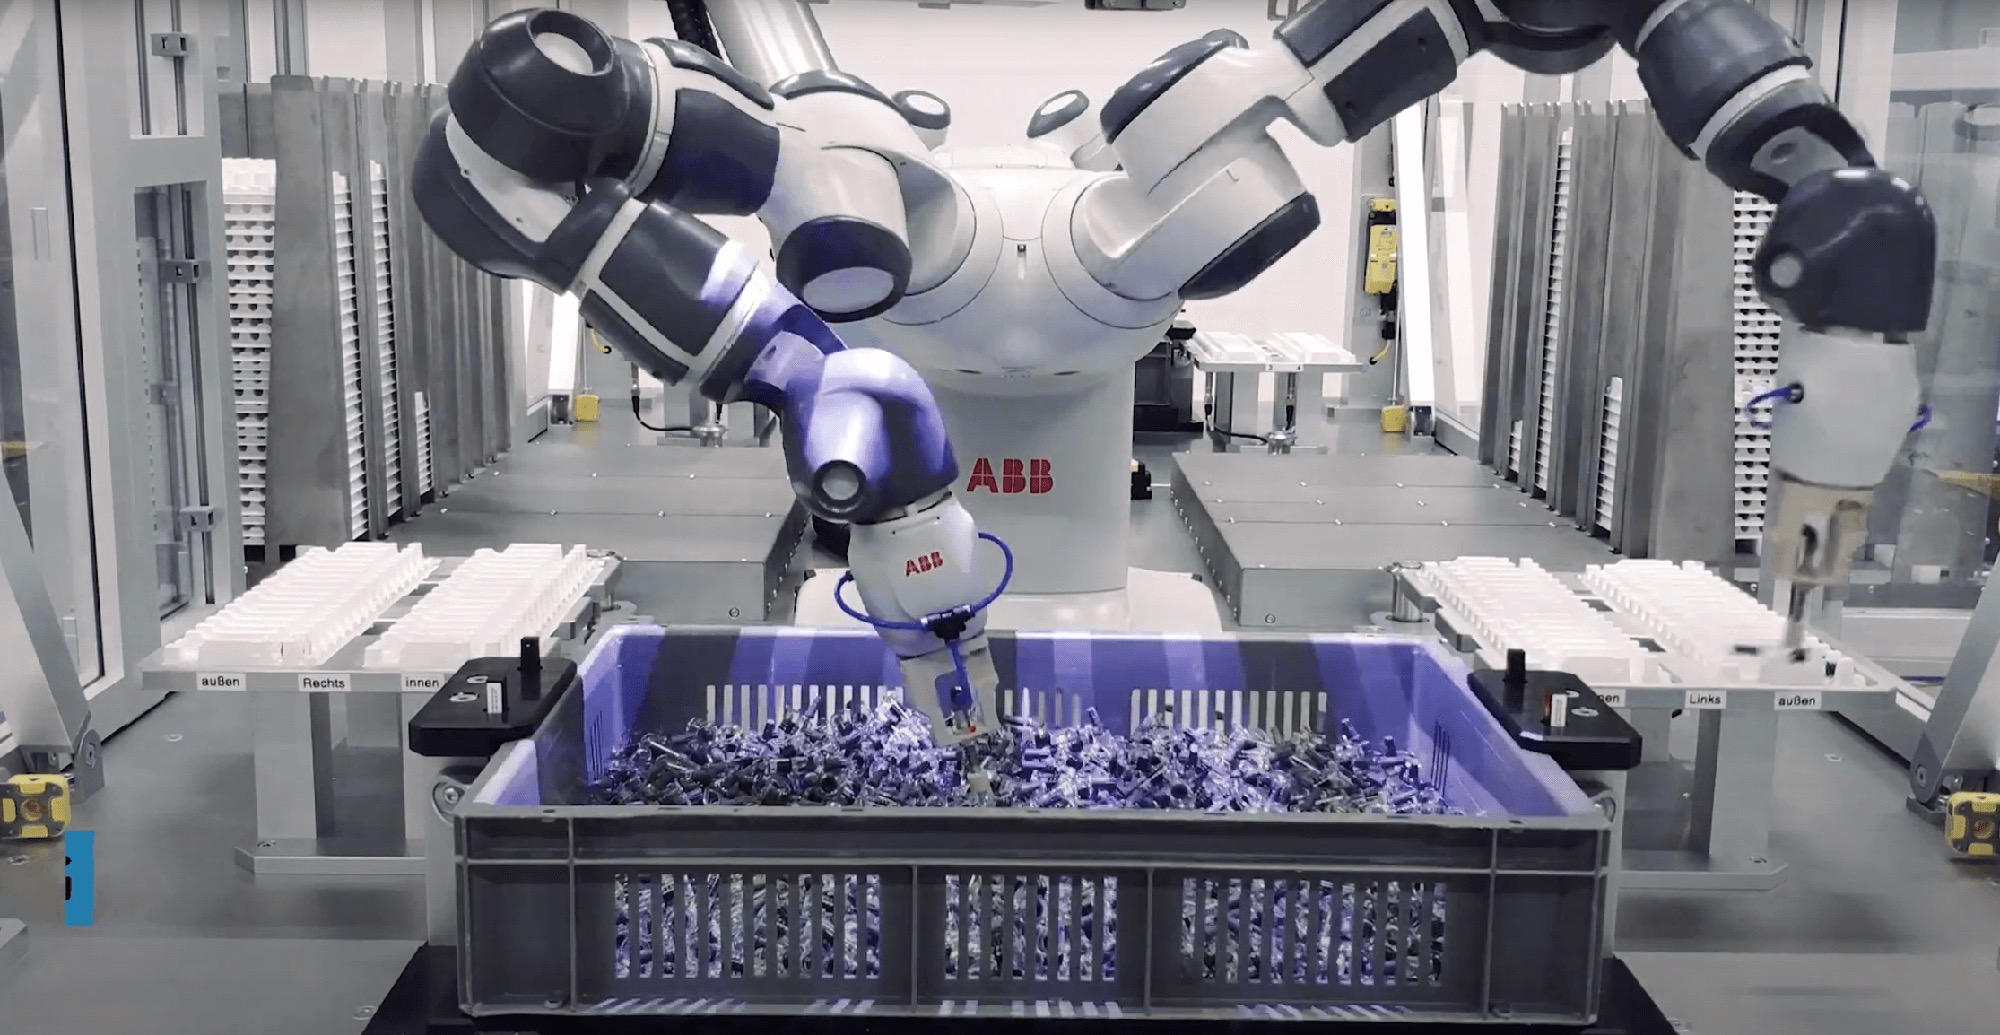 Automated picking and assembly of medical vials from bin with ABB YuMi